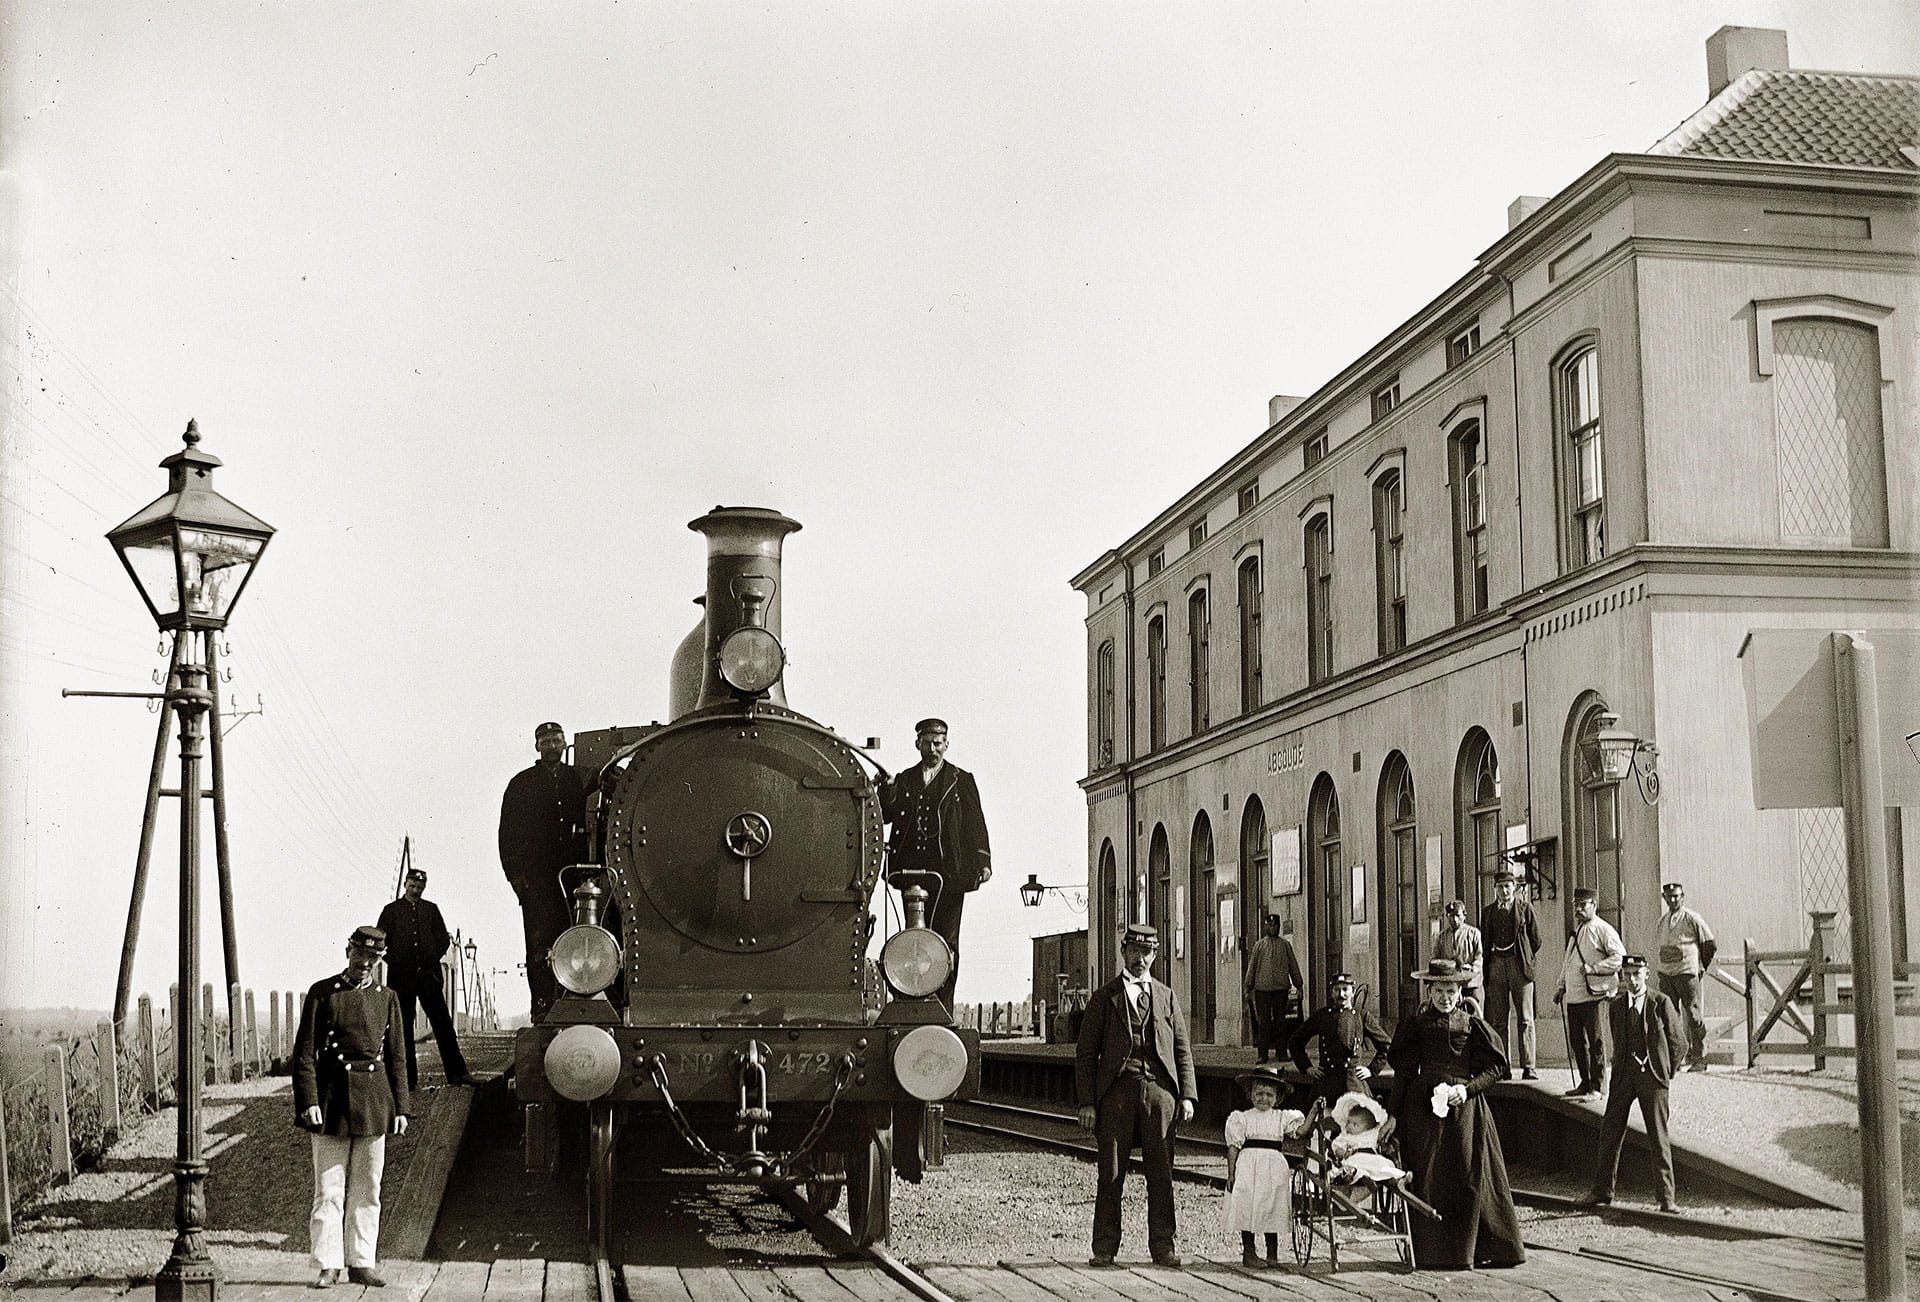 People standing around a locomotive in the city